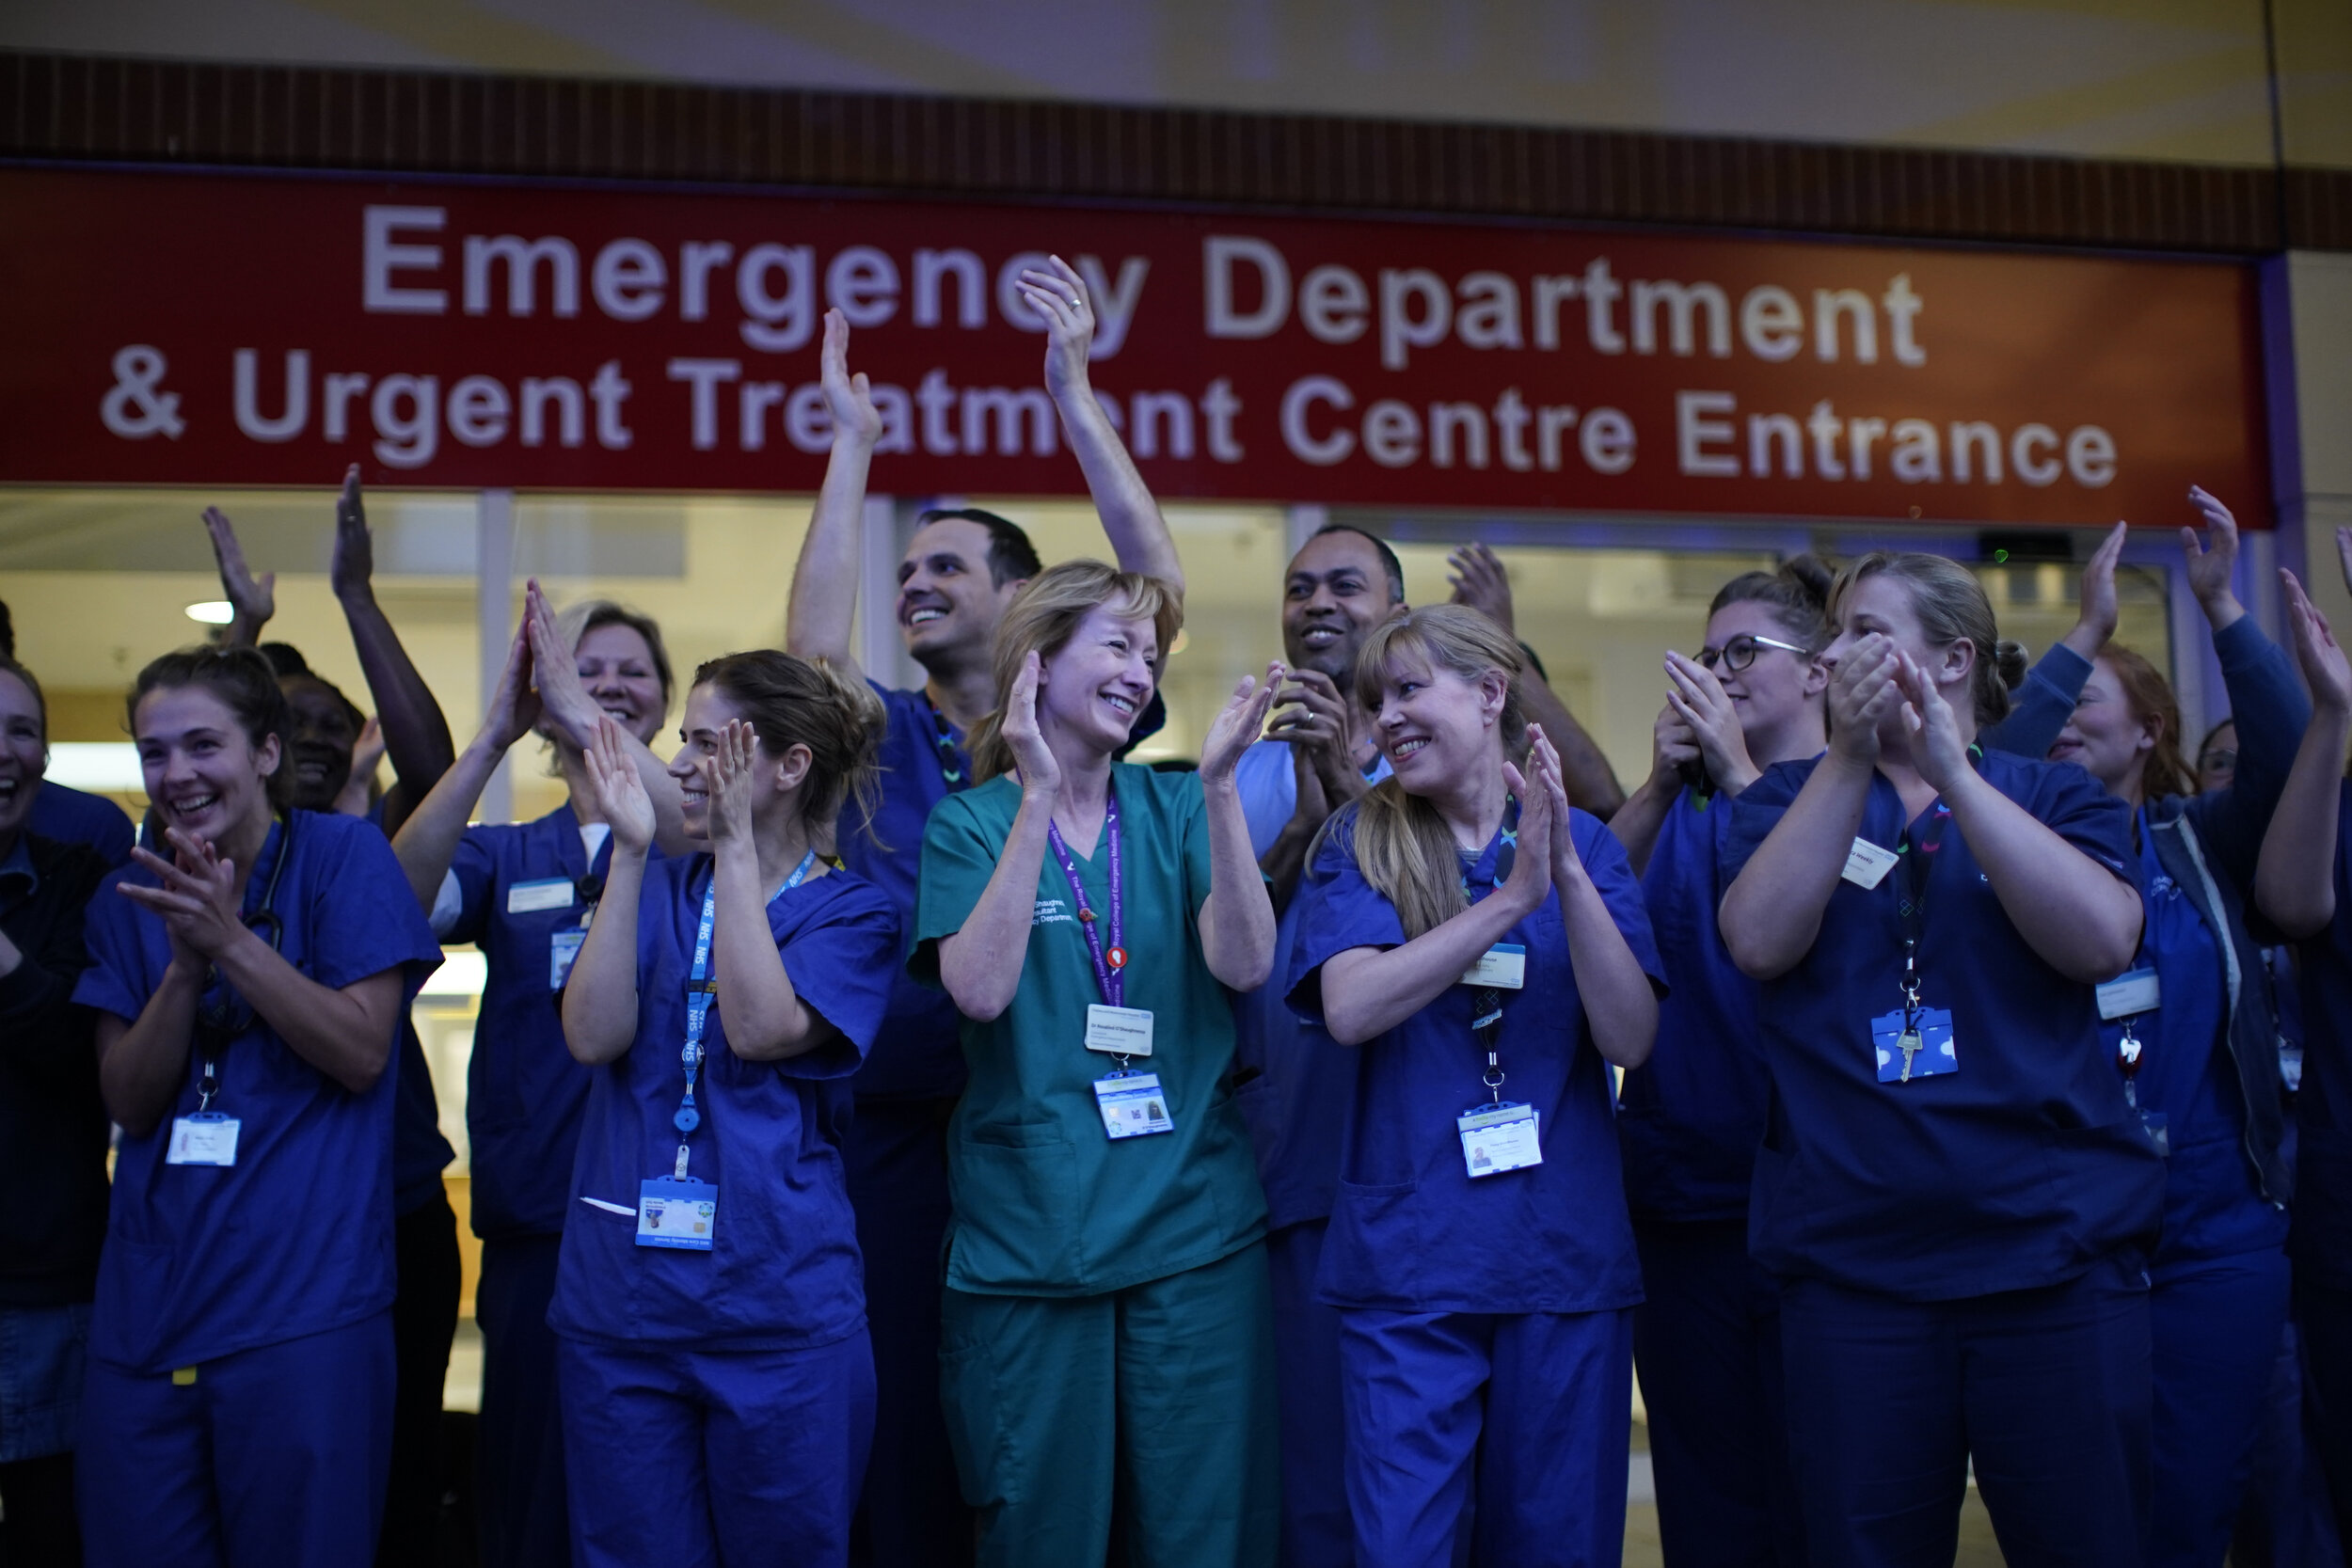  Nurses outside the Chelsea and Westminster Hospital, London, to salute local heroes during Thursday's nationwide Clap for Carers NHS initiative to applaud NHS workers and carers fighting the coronavirus pandemic. Picture by: Aaron Chown/PA Images. D